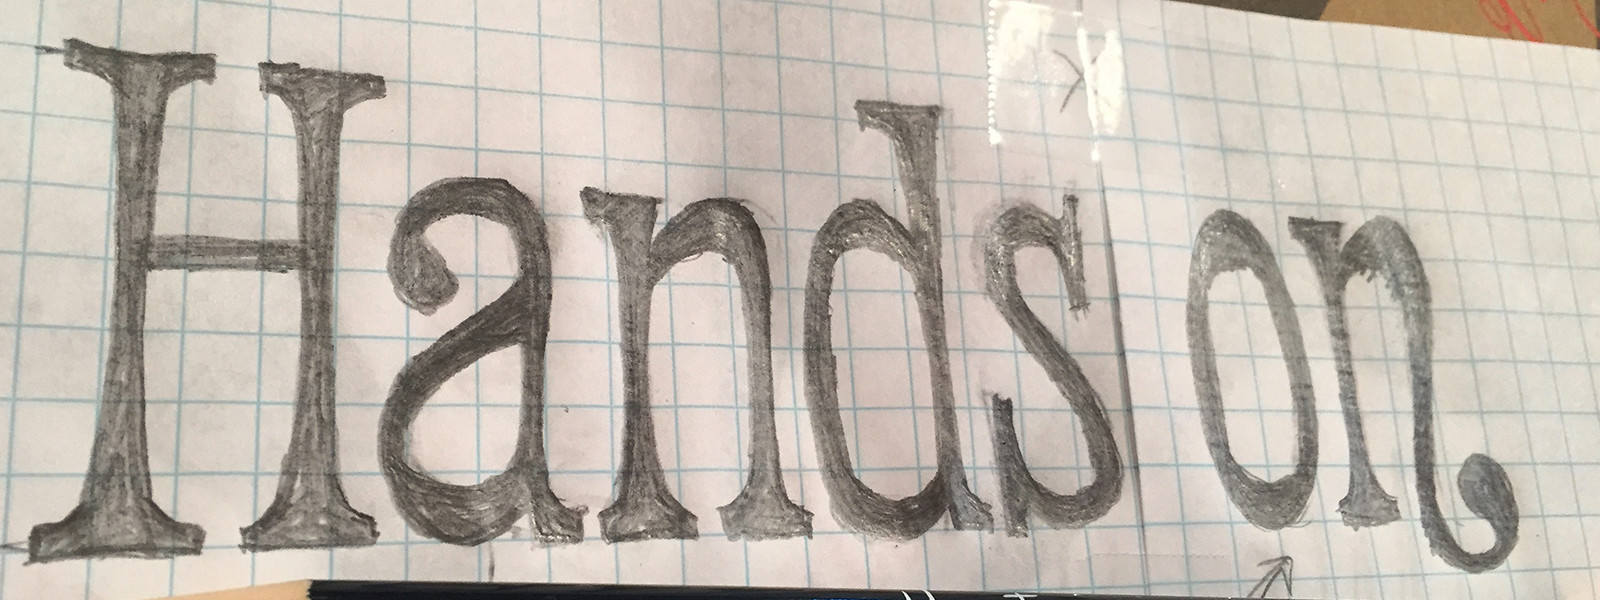 Fun-lettering-based-on-clarendon